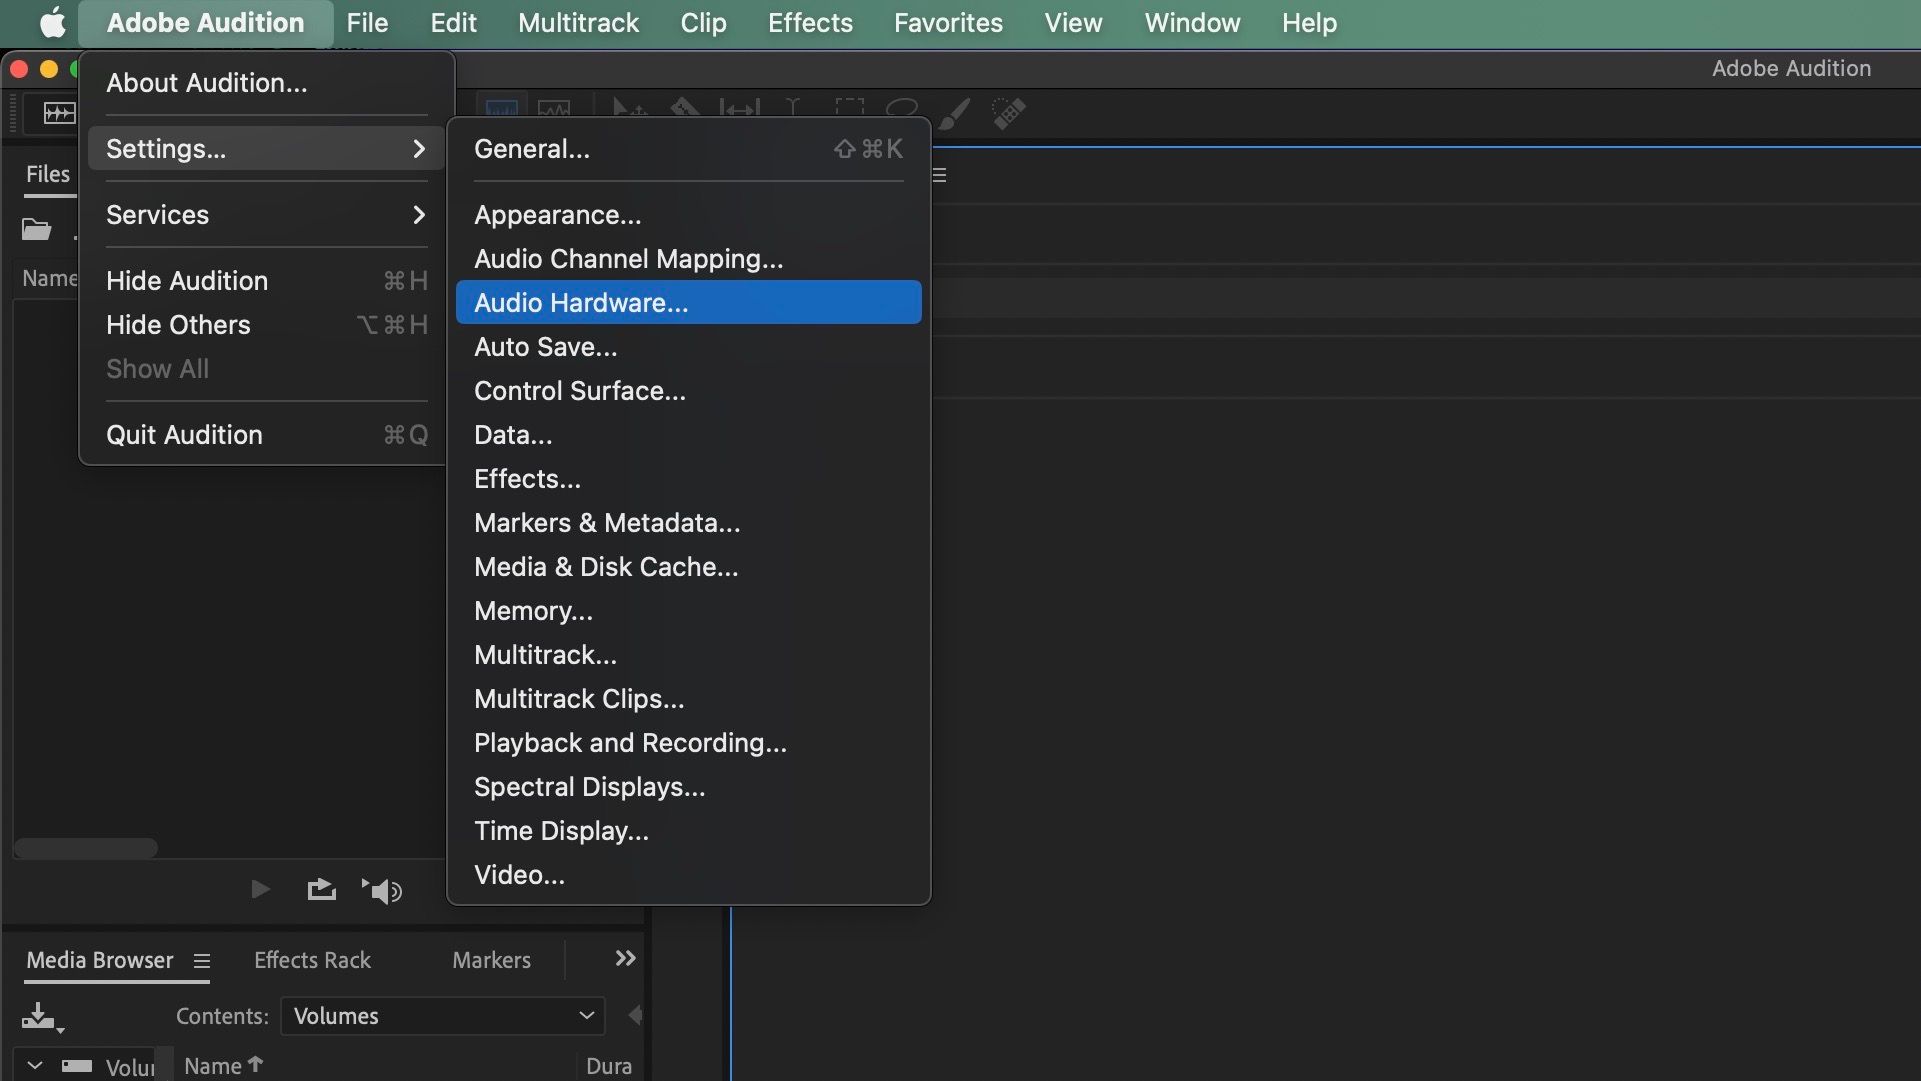 Settings menu in Adobe Audition with Audio Hardware option highlighted in blue.